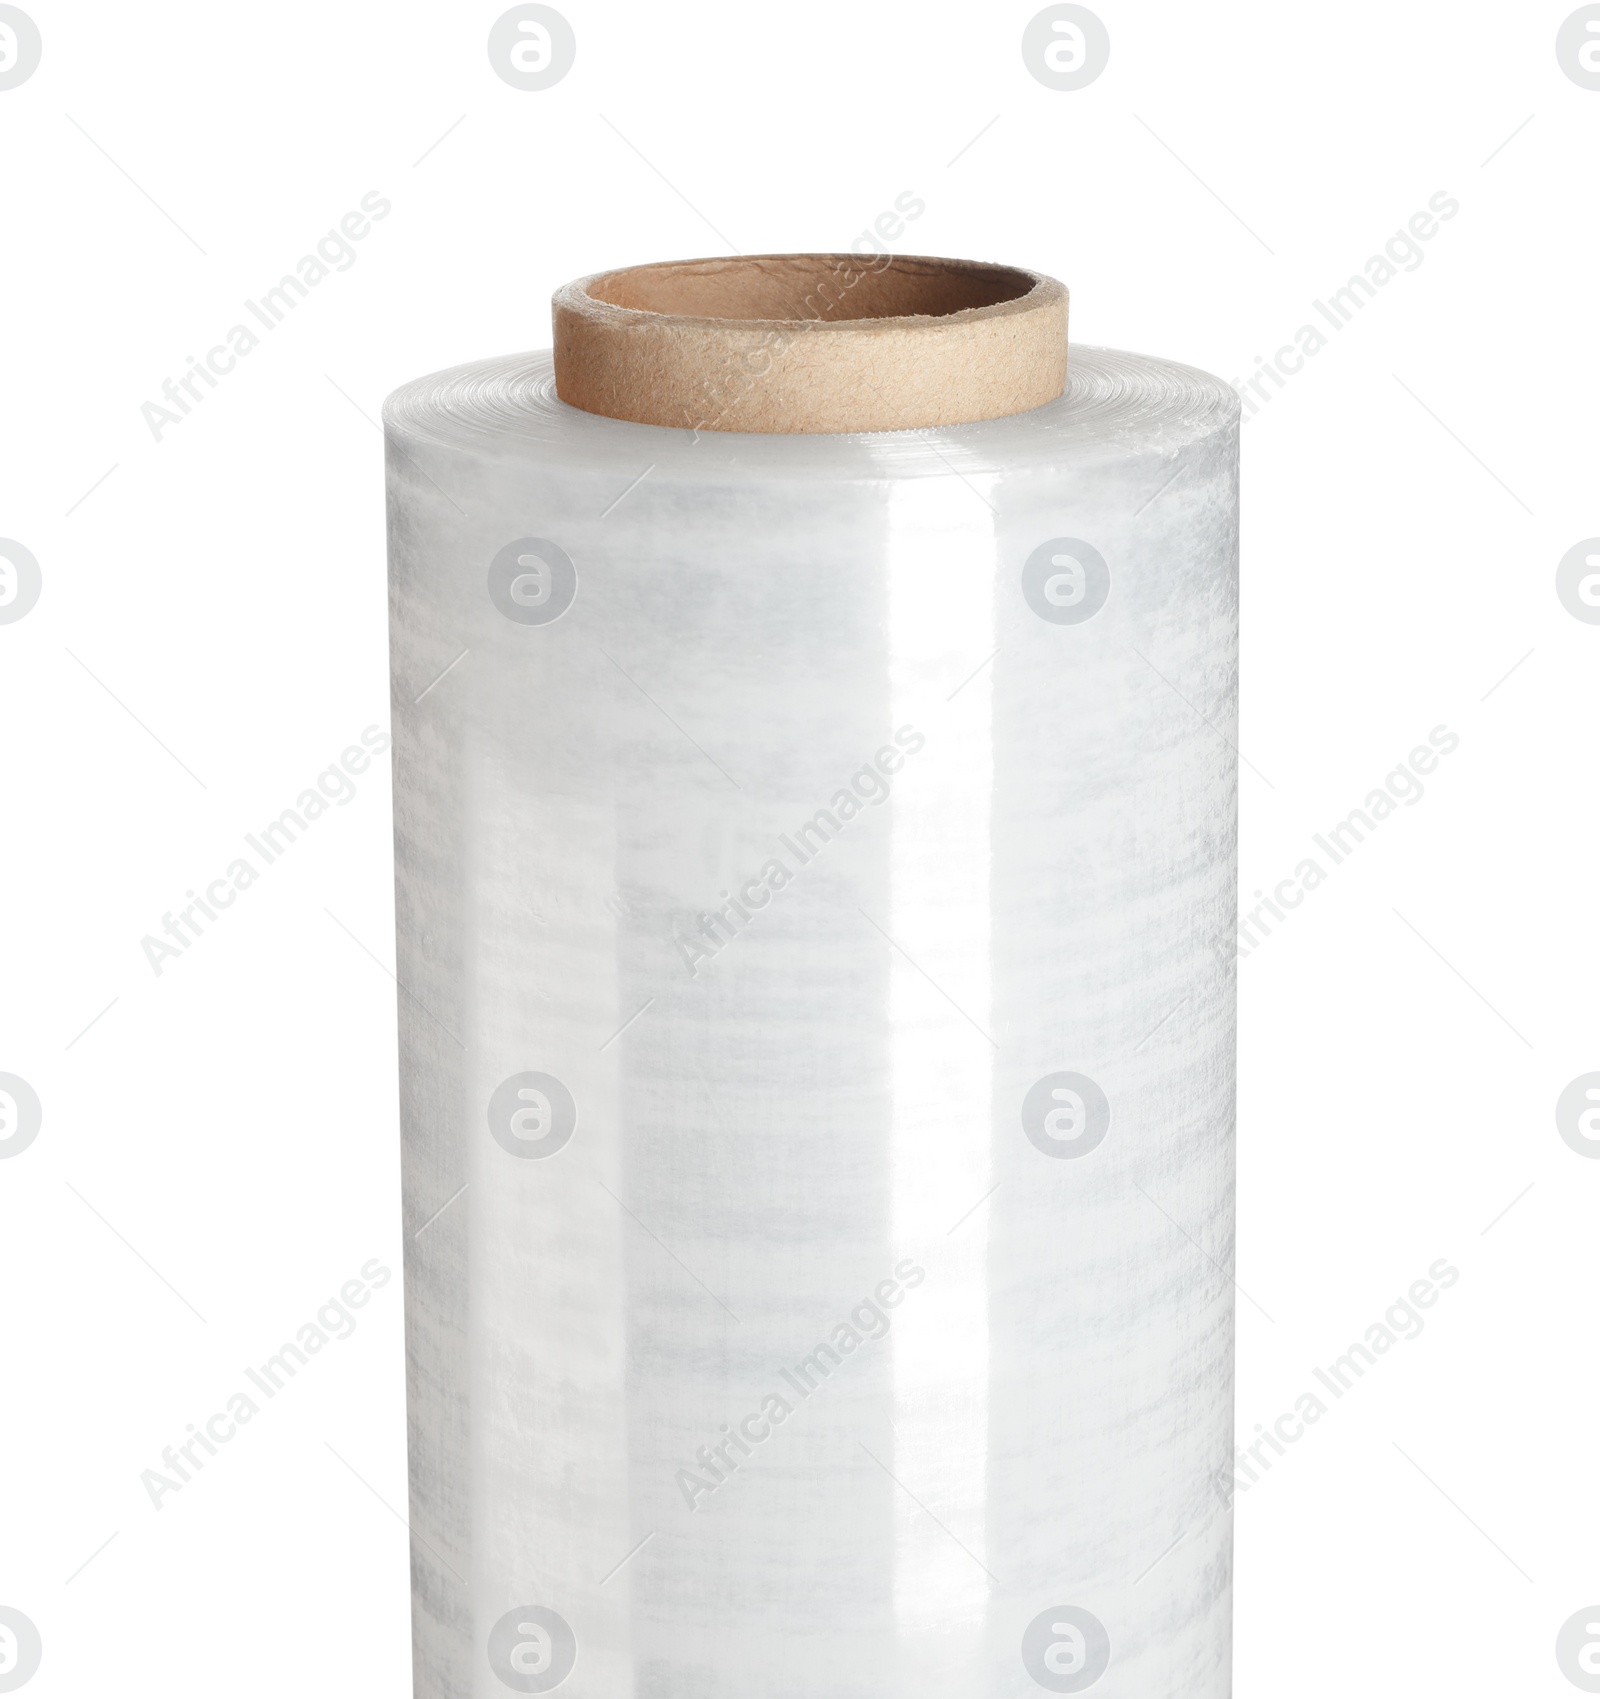 Photo of Roll of plastic stretch wrap film isolated on white